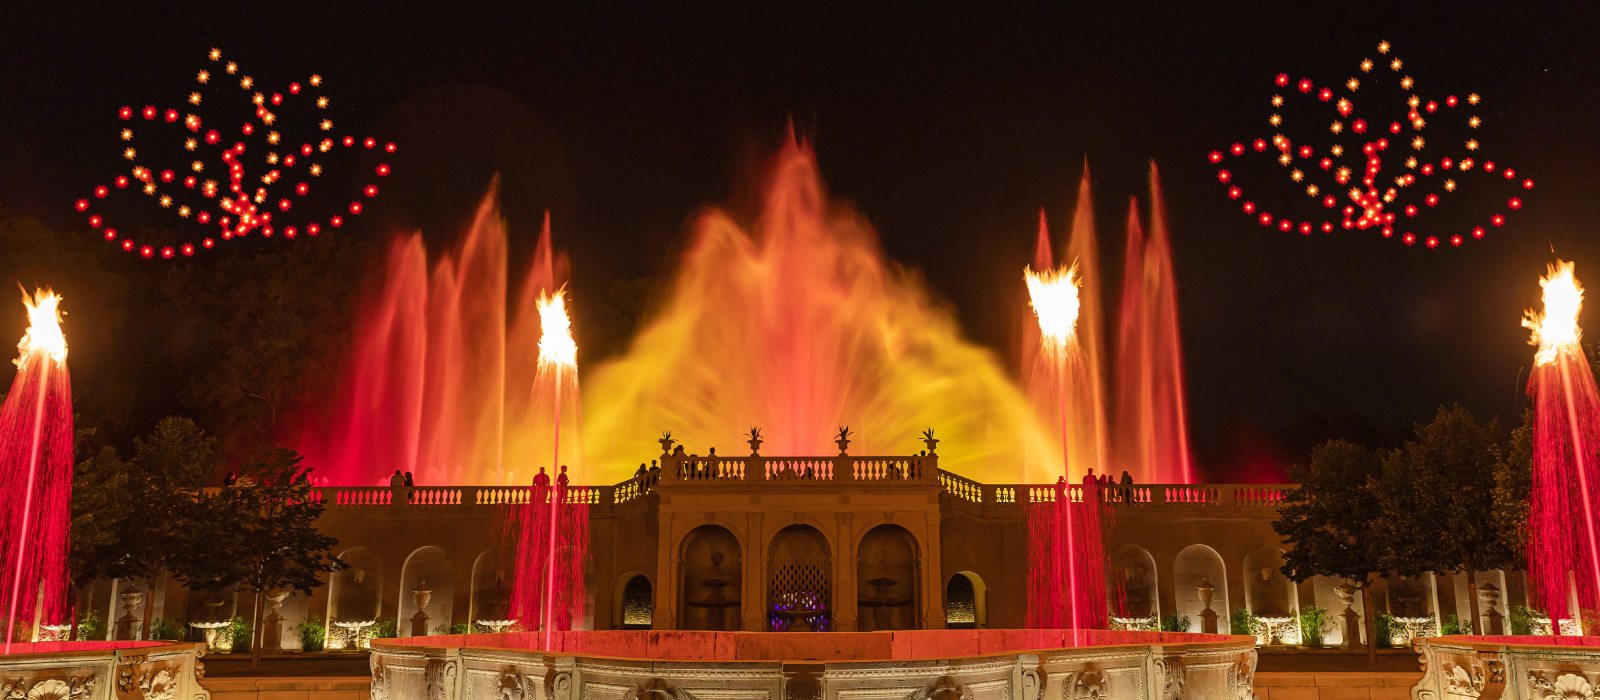 Drones & Fountains Shows Longwood Gardens